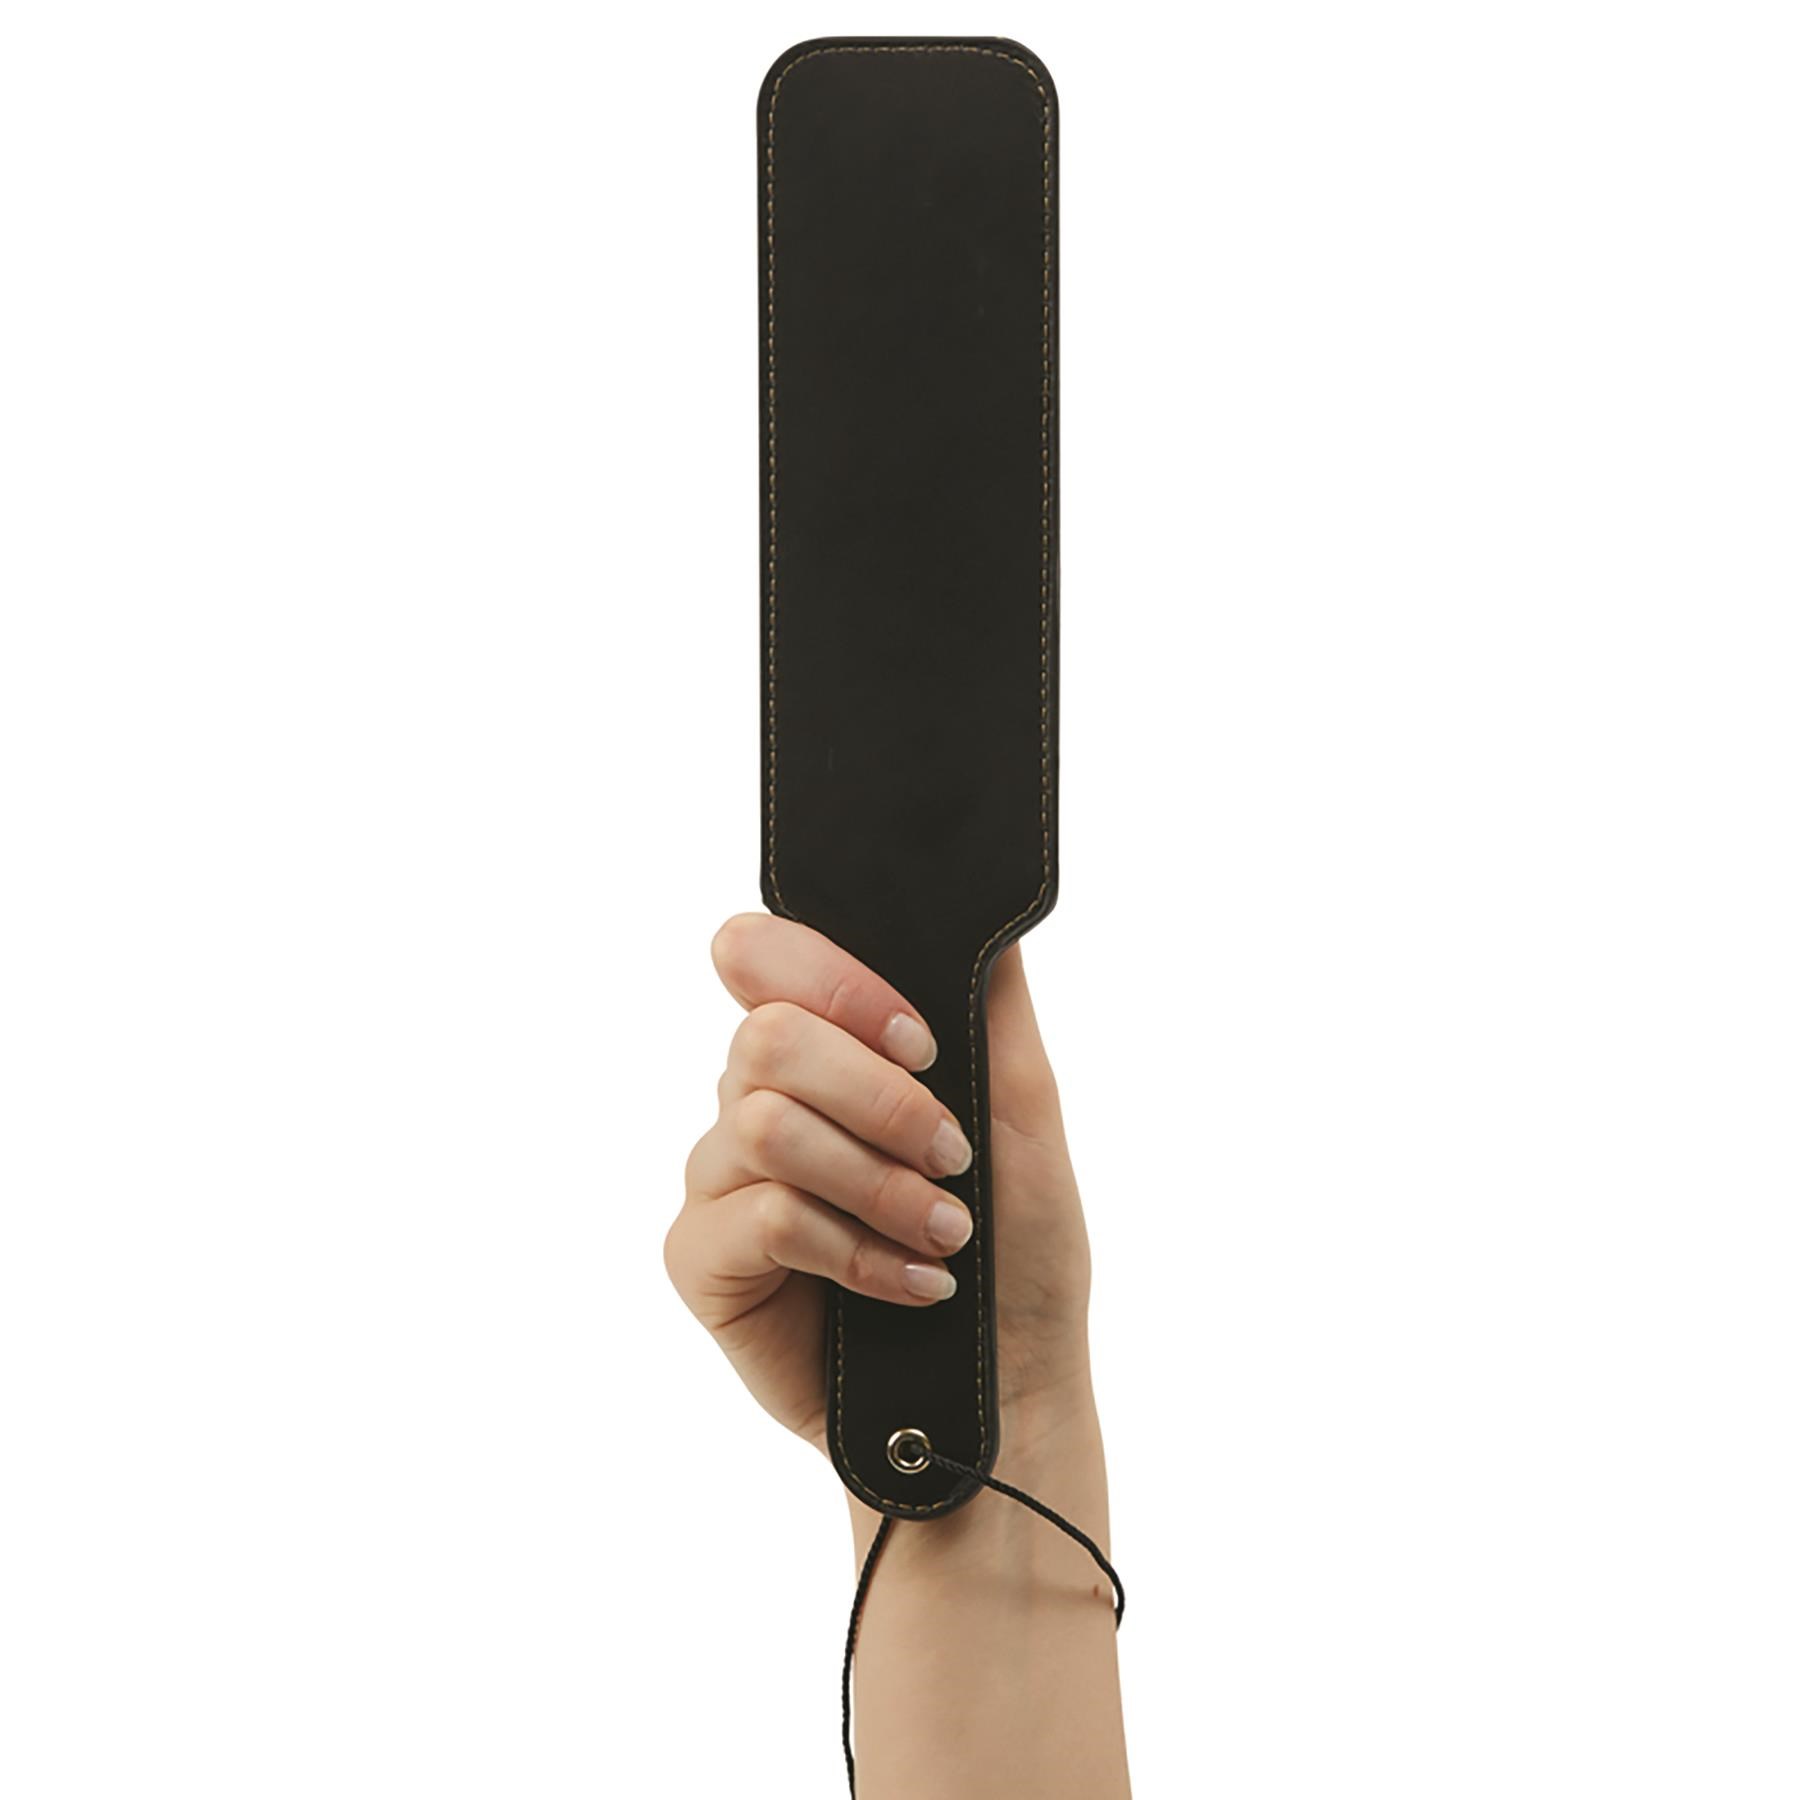 Wild Secrets Orchestra Tempo Paddle - Hand Shot to Show Size